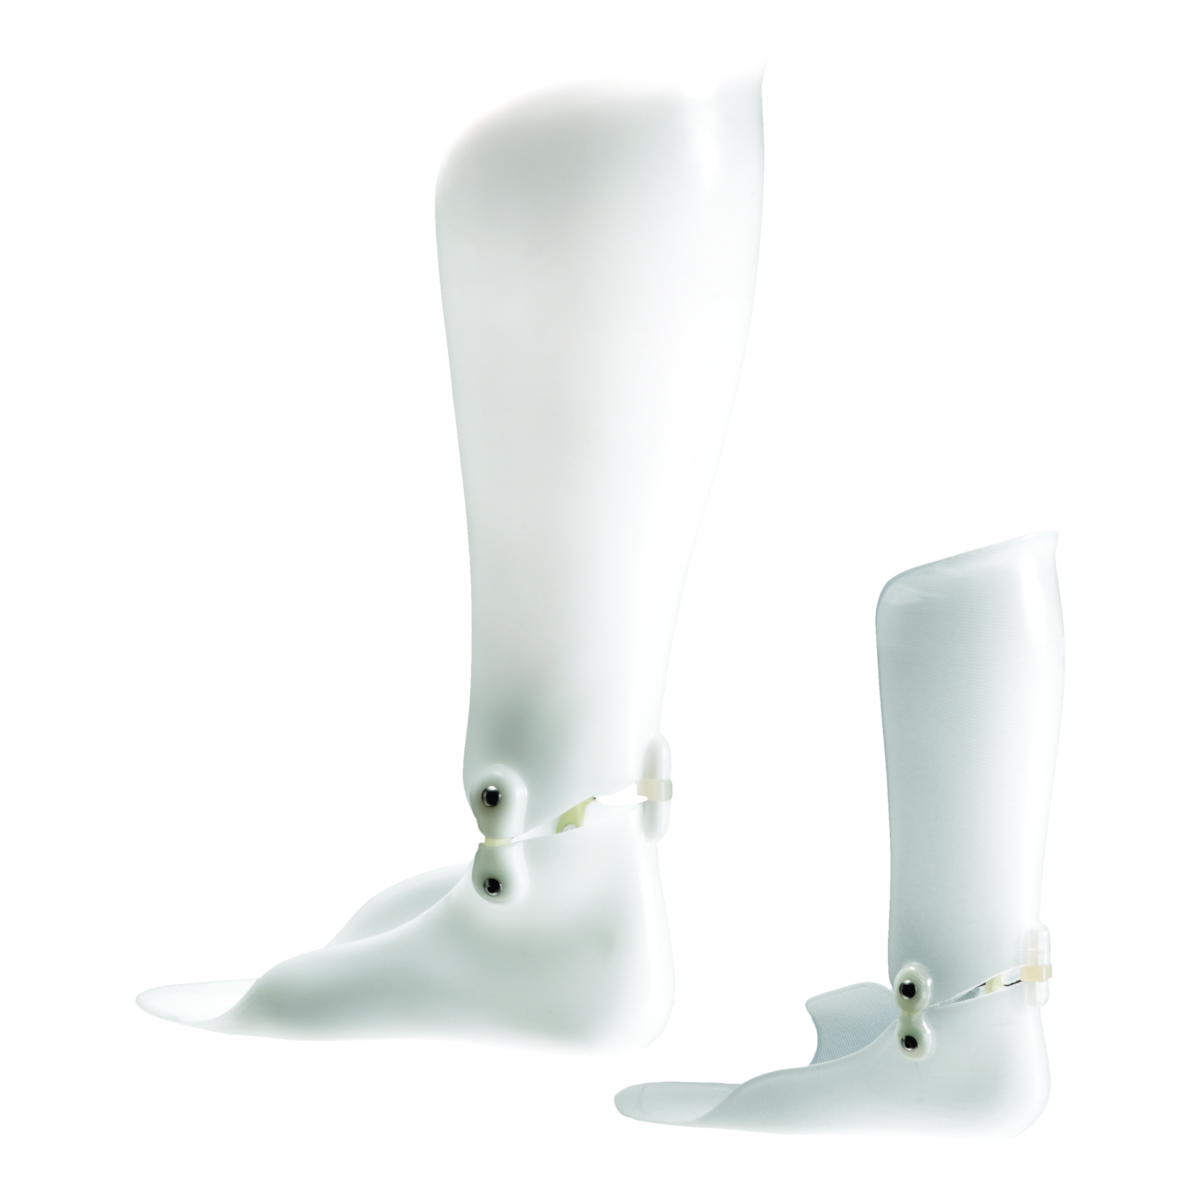 Snapstop Kit - Adult | Plantar Flexion Stops | AFO - Ankle Foot ...